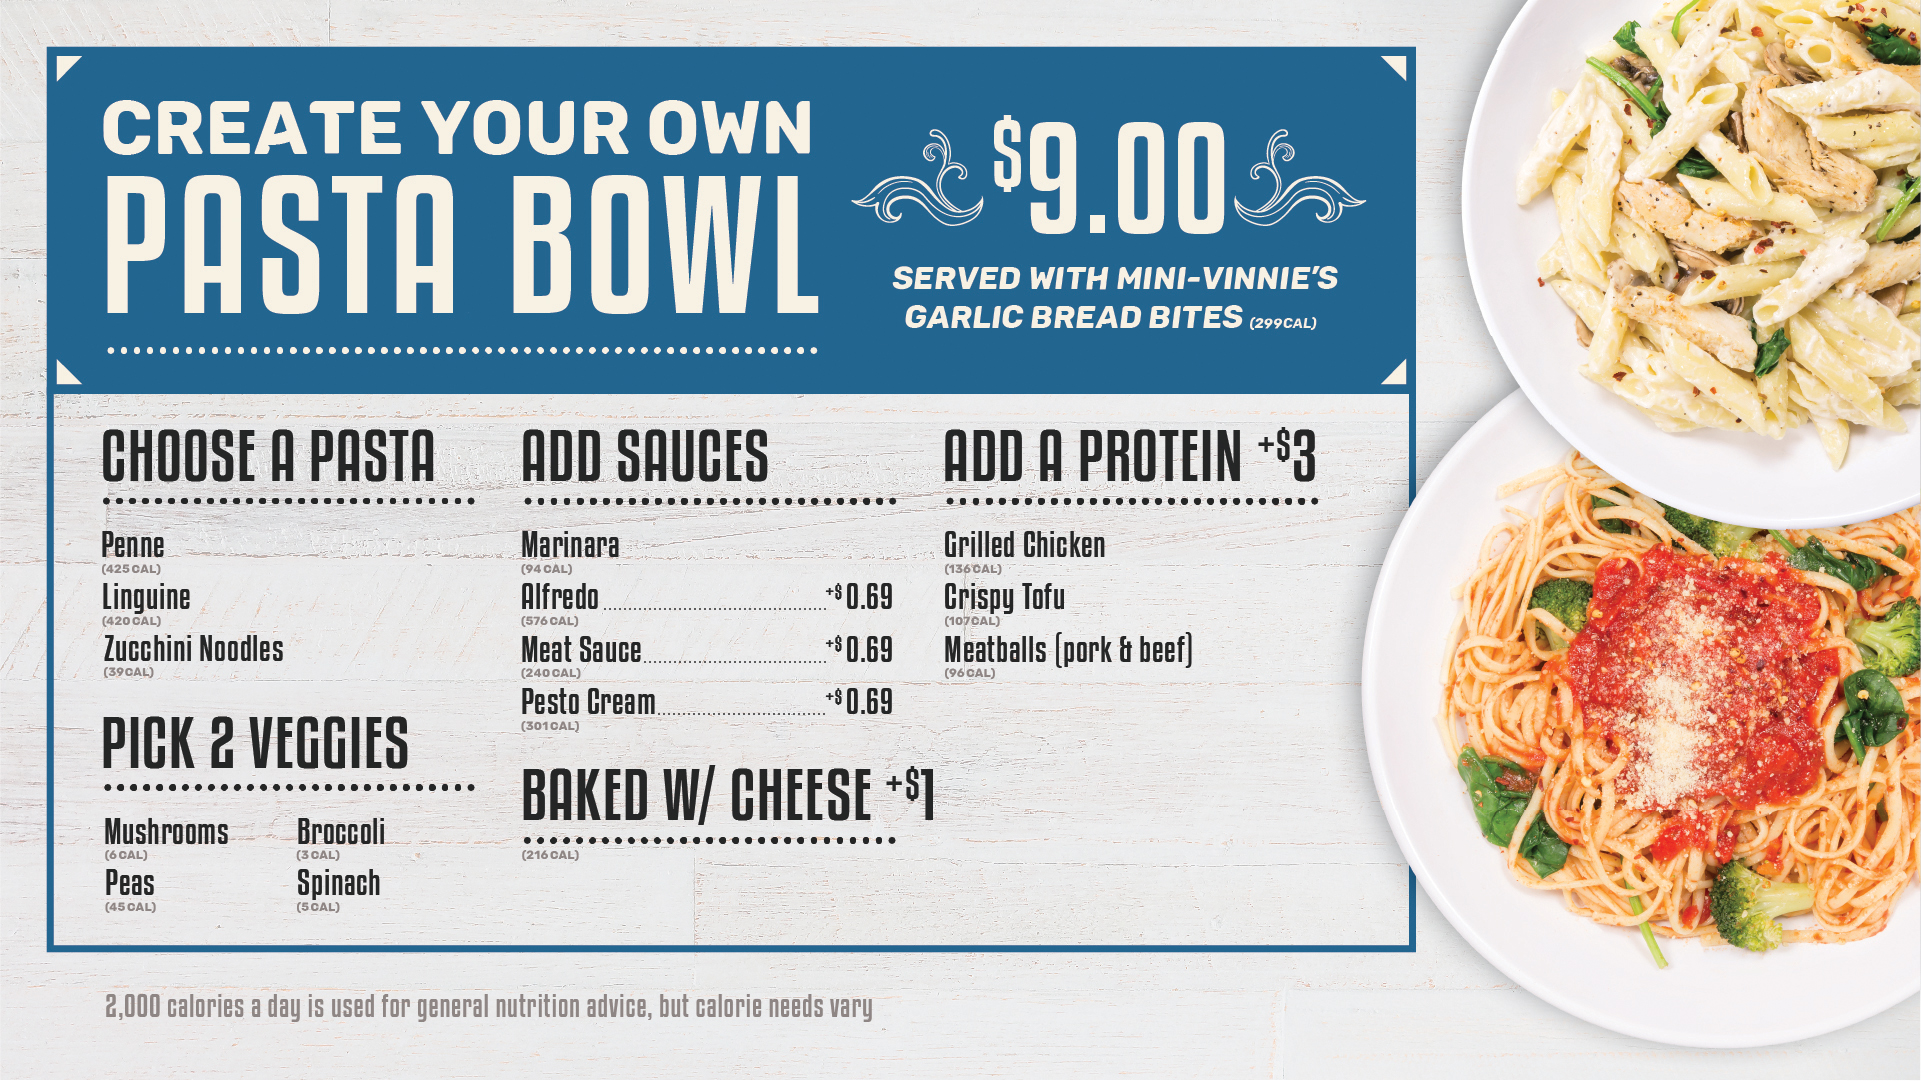 Create your own pasta bowl - $8.00.